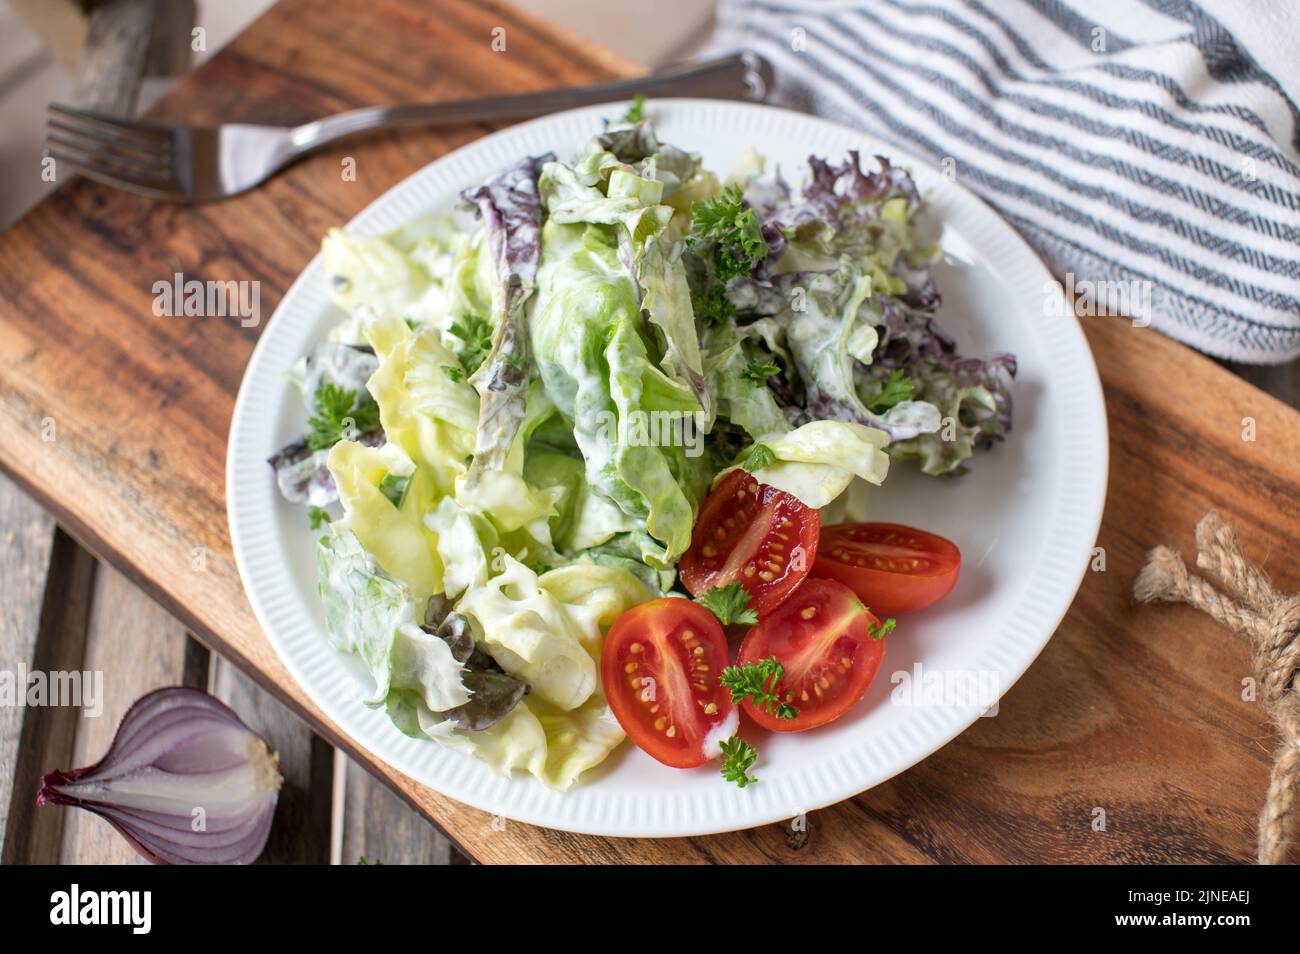 Side salad with lettuce and tomatoes on a plate marinated with sour cream dressing. Traditional german side dish or appetizer Stock Photo